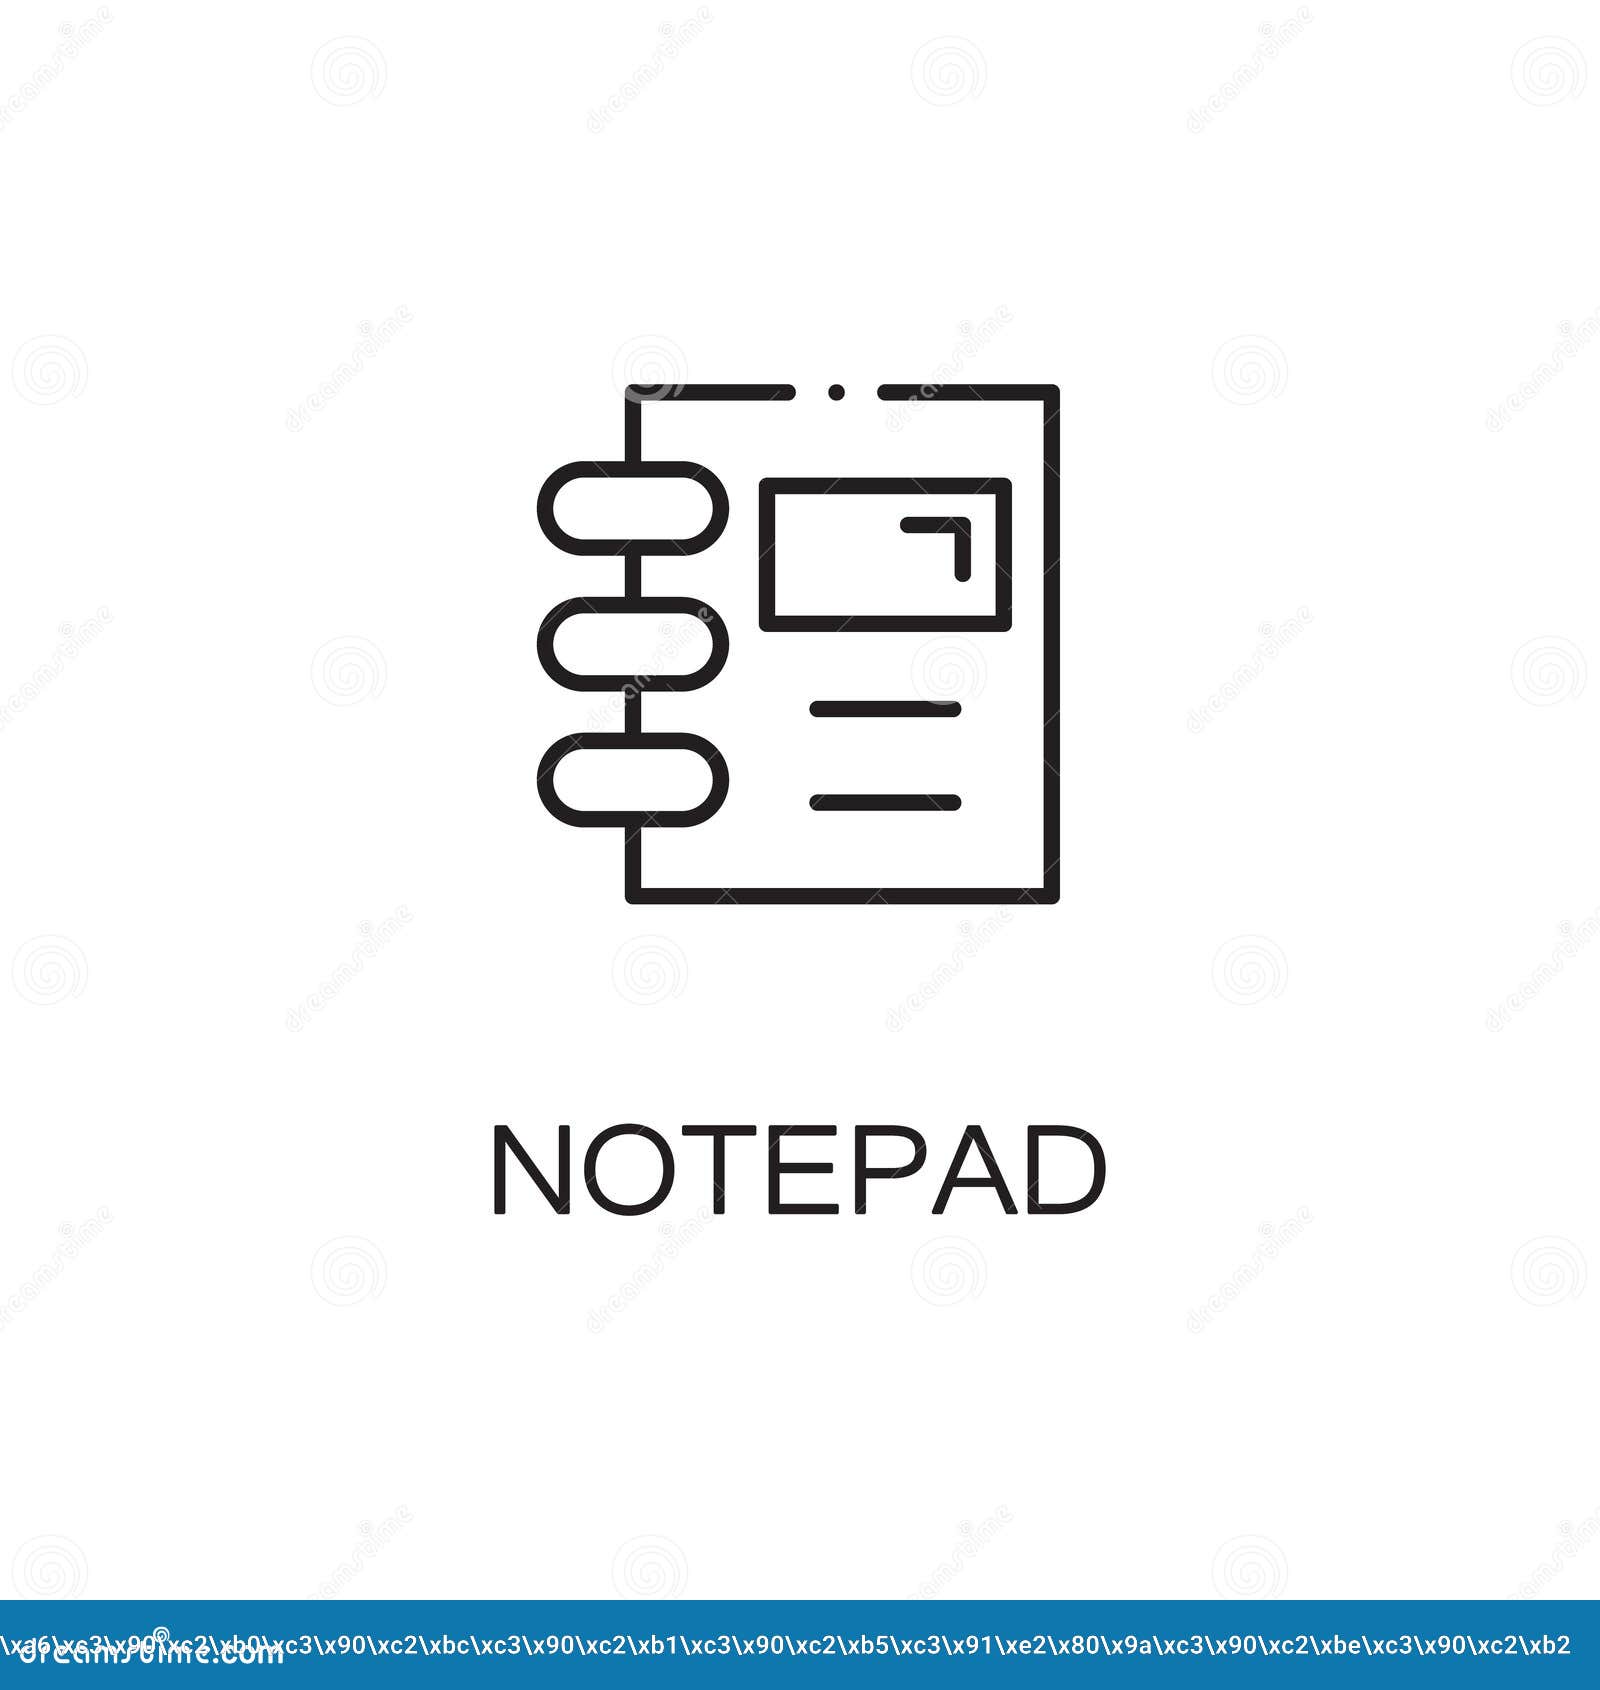 Notepad line icon stock vector. Illustration of paper - 84200806